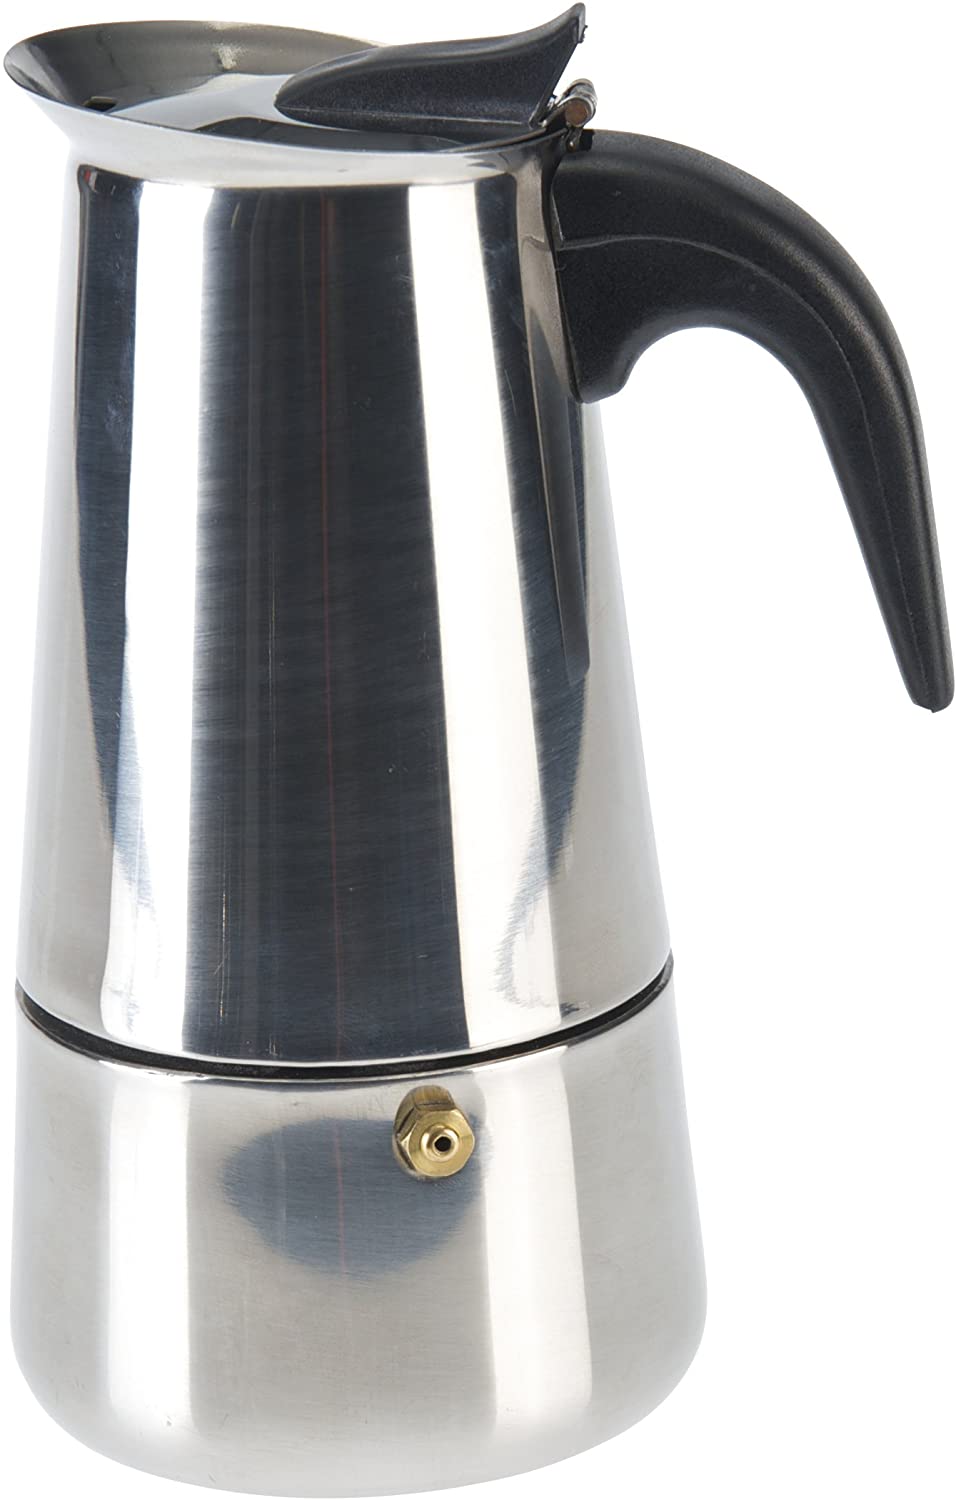 Axentia 223539 Stainless Steel Espresso Maker for 6 Cups